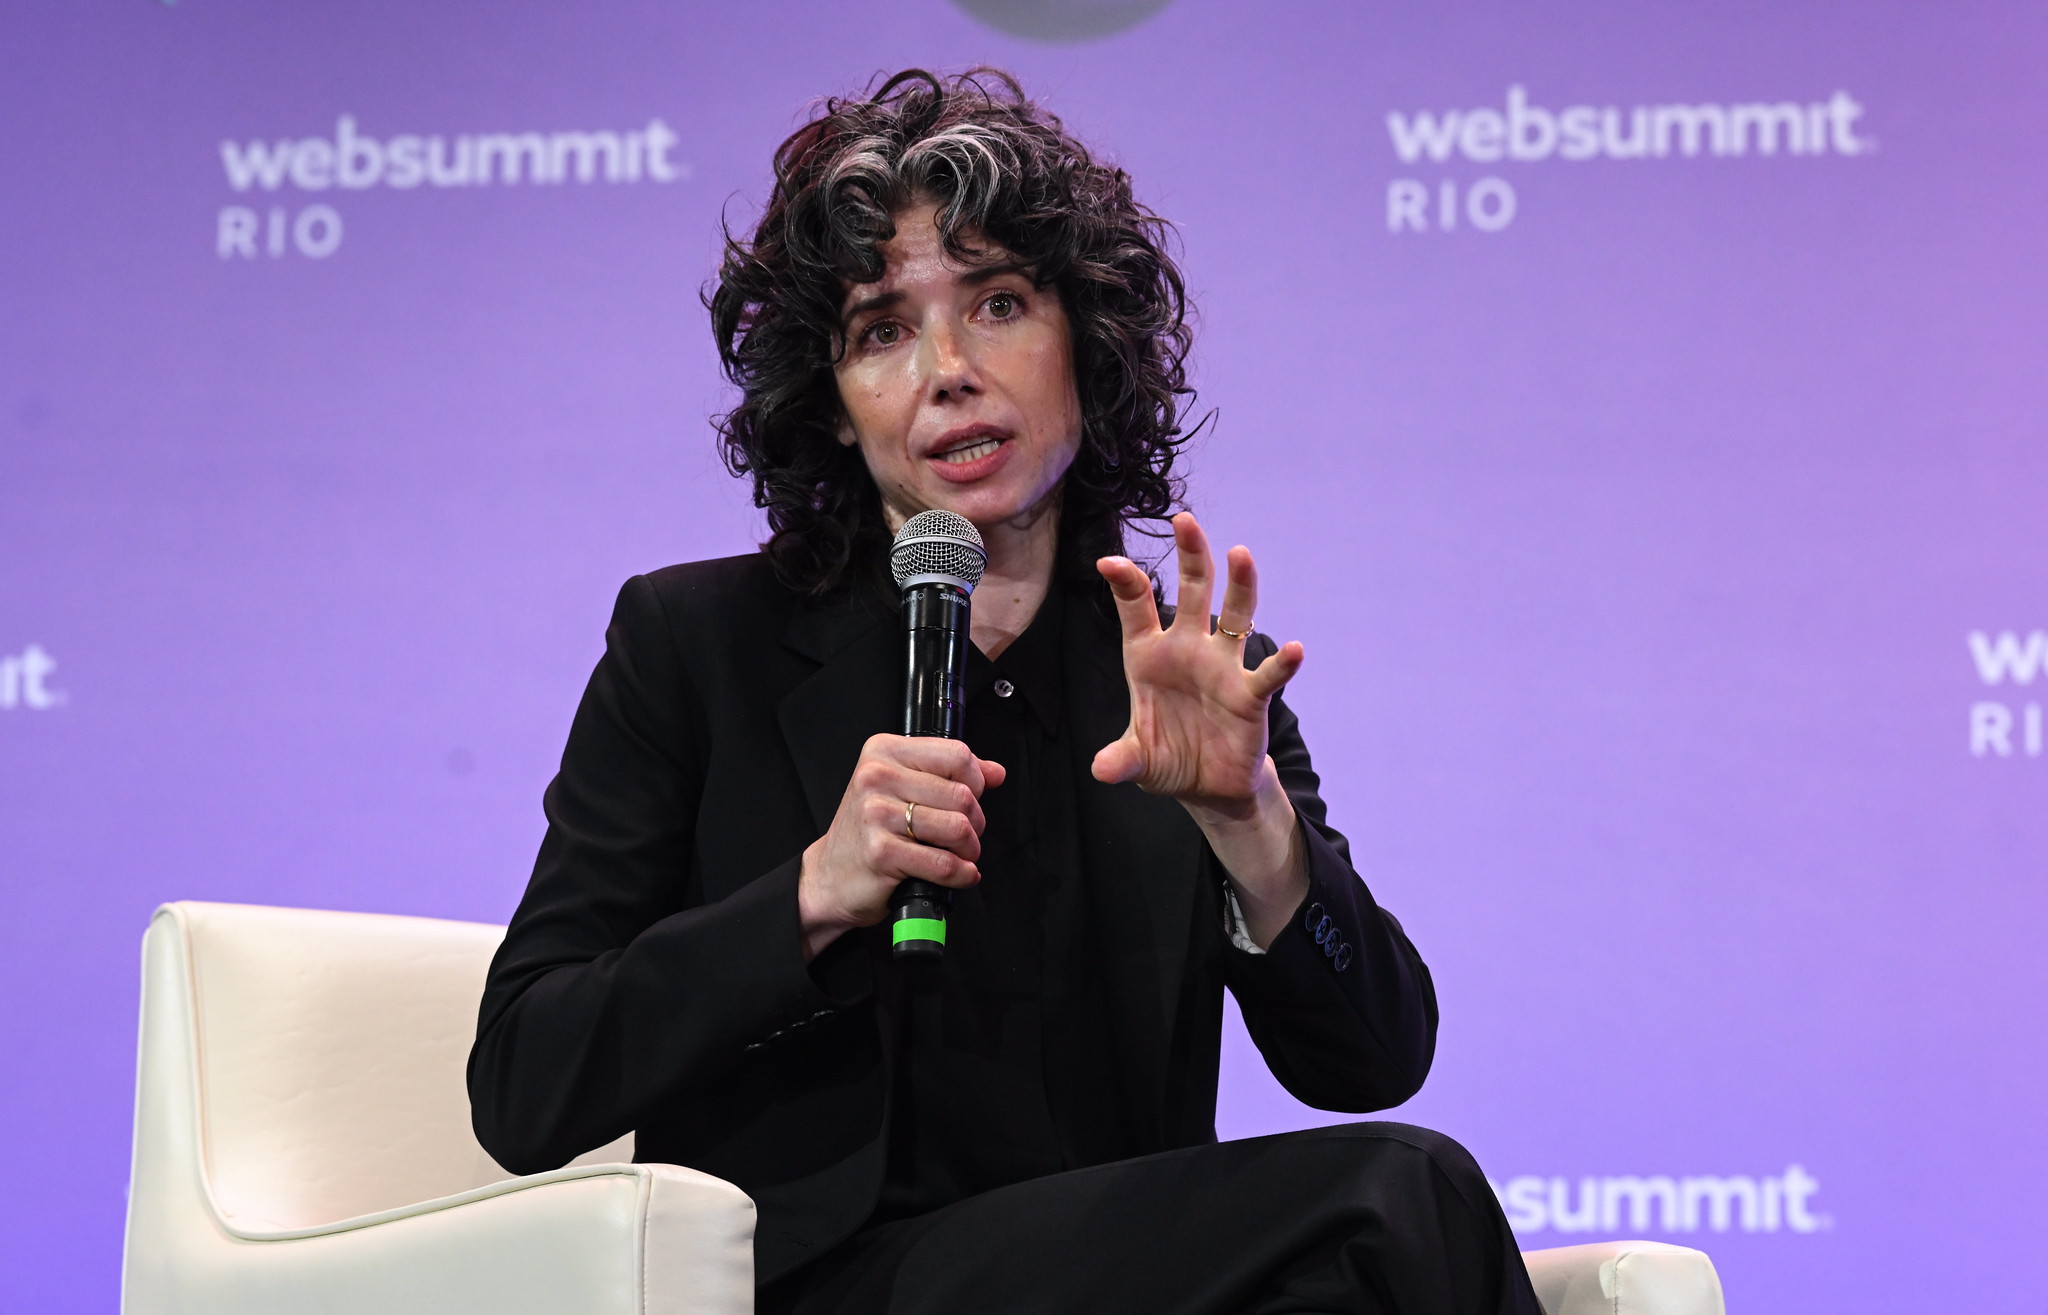 A person (Signal president Meredith Whittaker) sits in an armchair. They hold a microphone in their right hand and are gesturing with their left. They appear to be speaking. On the wall behind them, the Web Summit Rio logo is visible in several places.